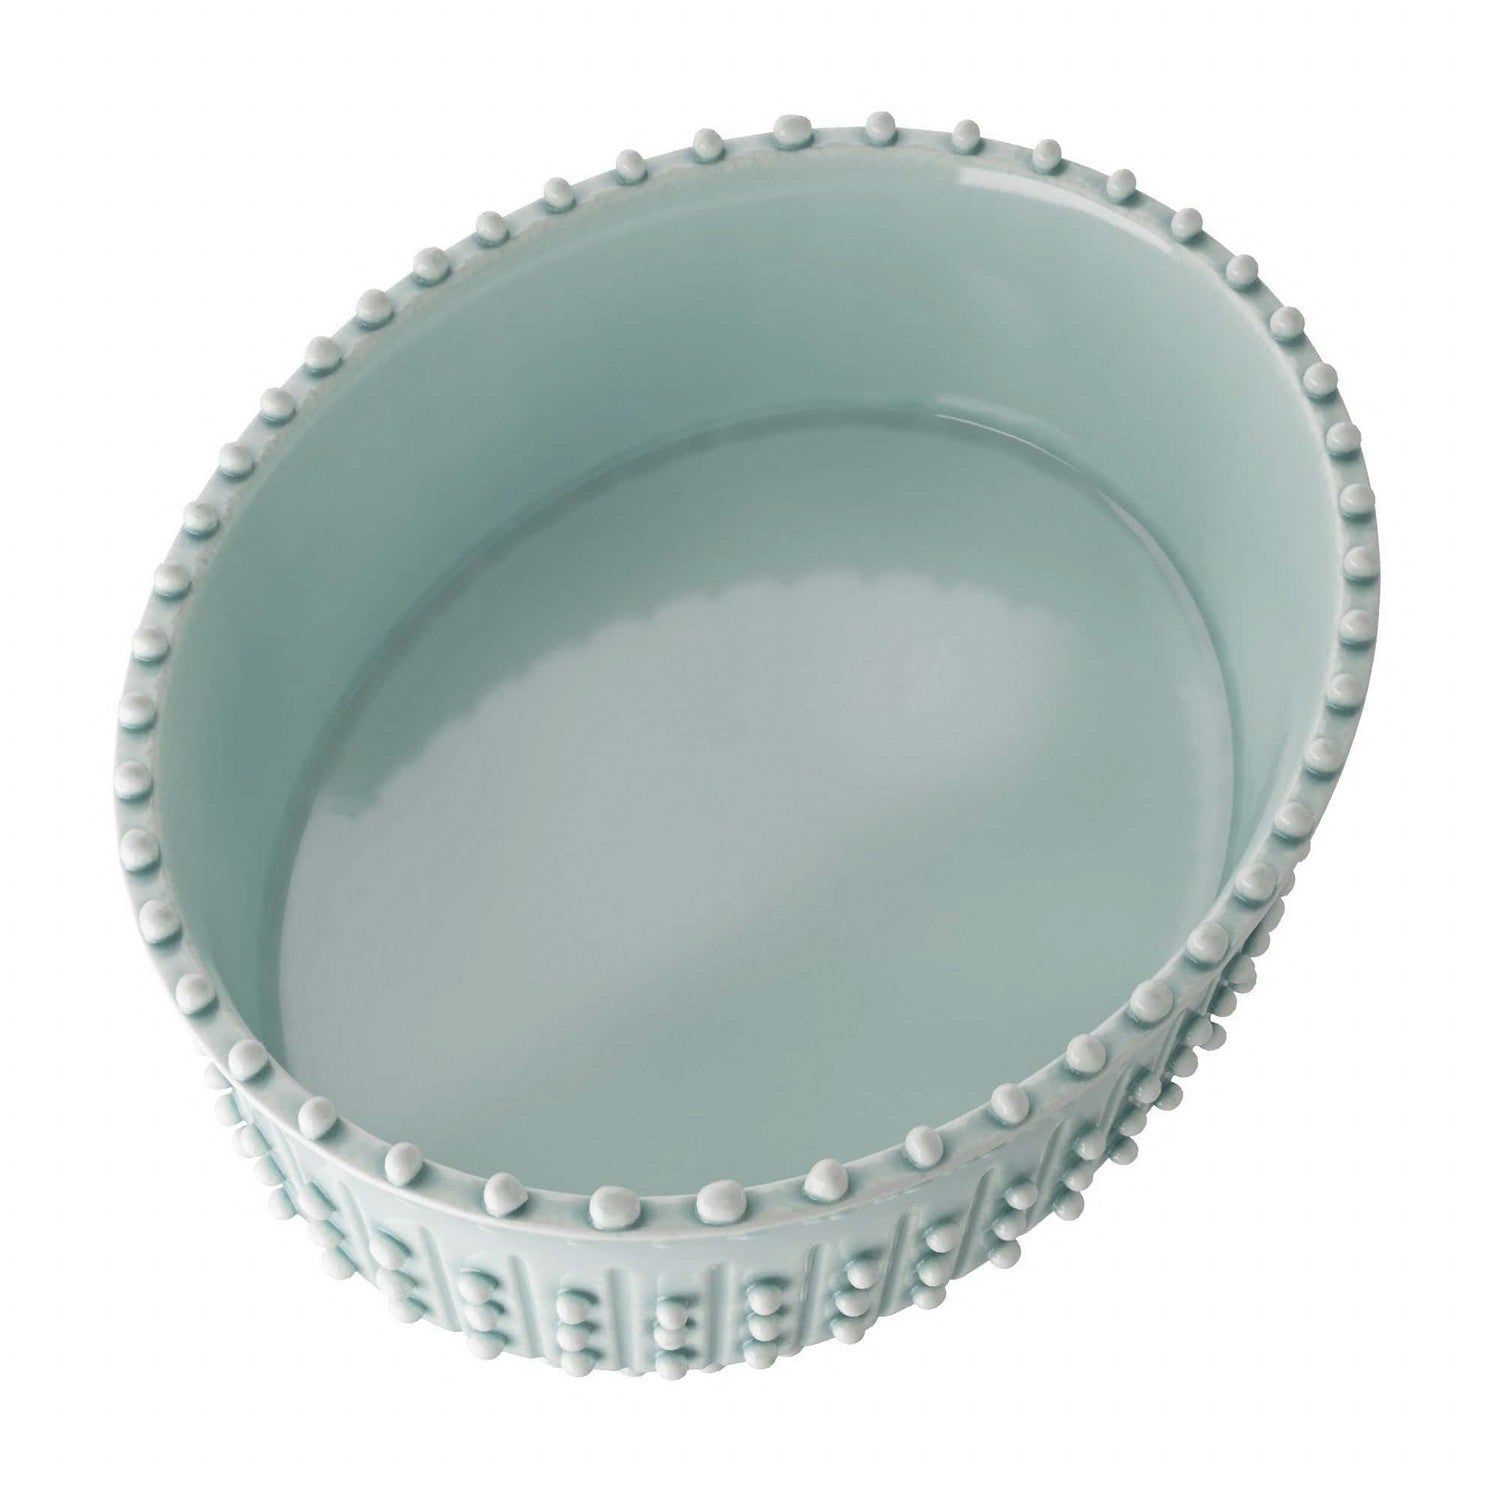 Centerpiece from the Spitzy collection in Celadon finish